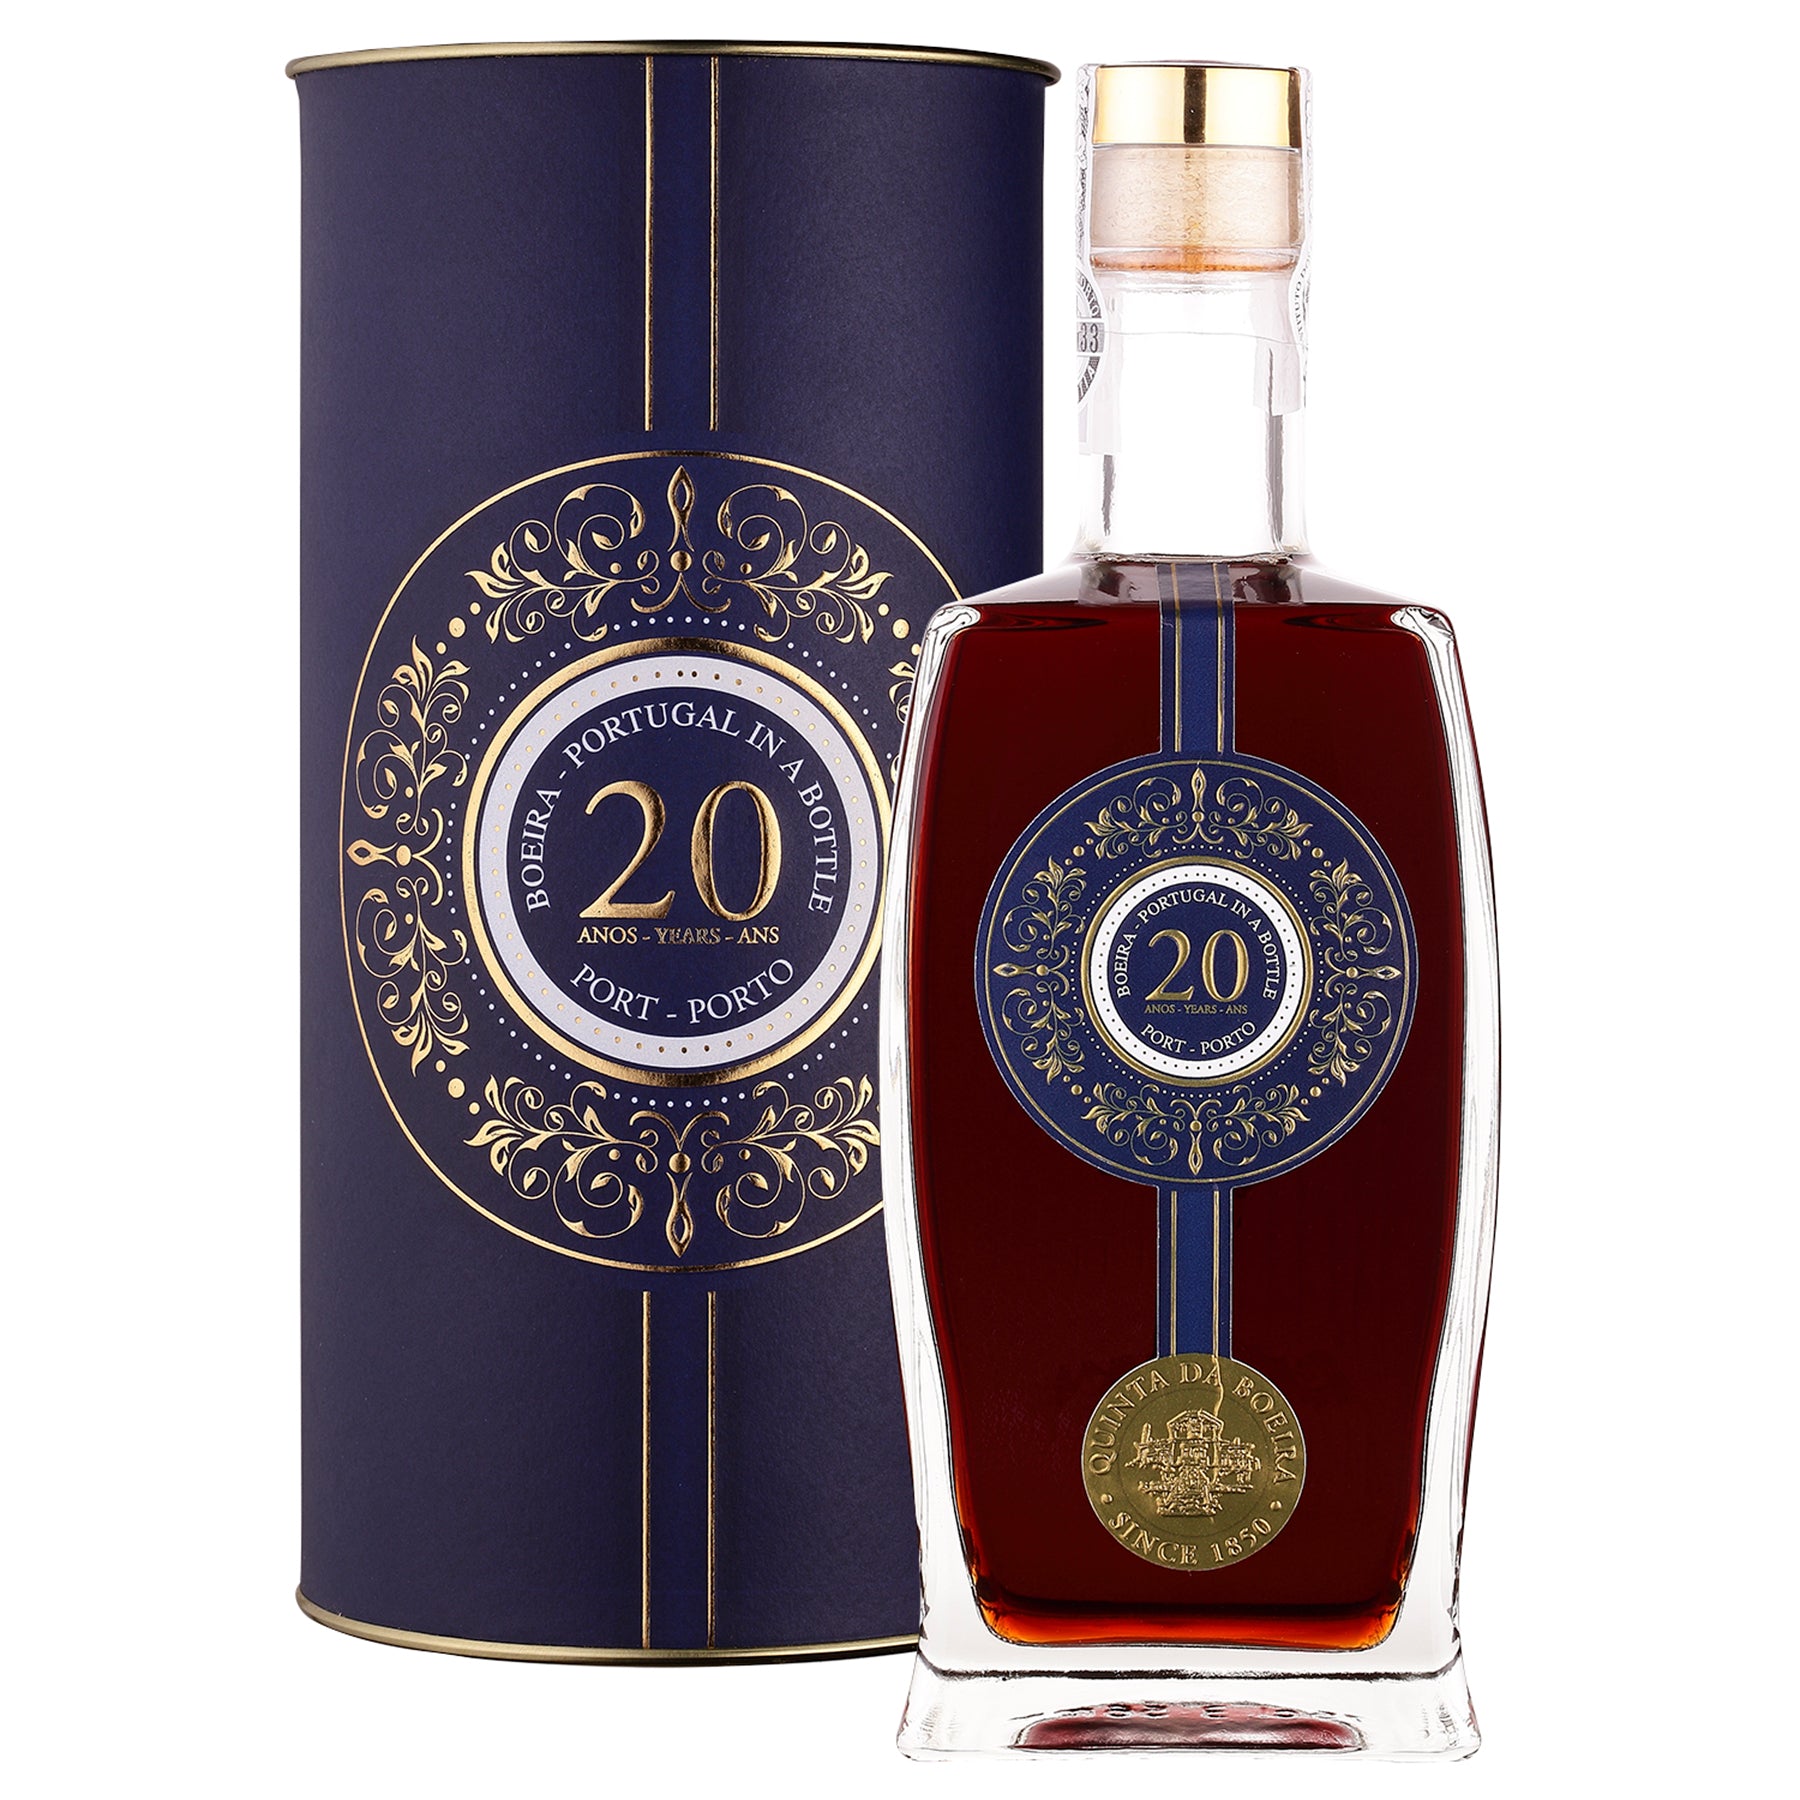 Quinta Boeira 20 Years Old Tawny Port